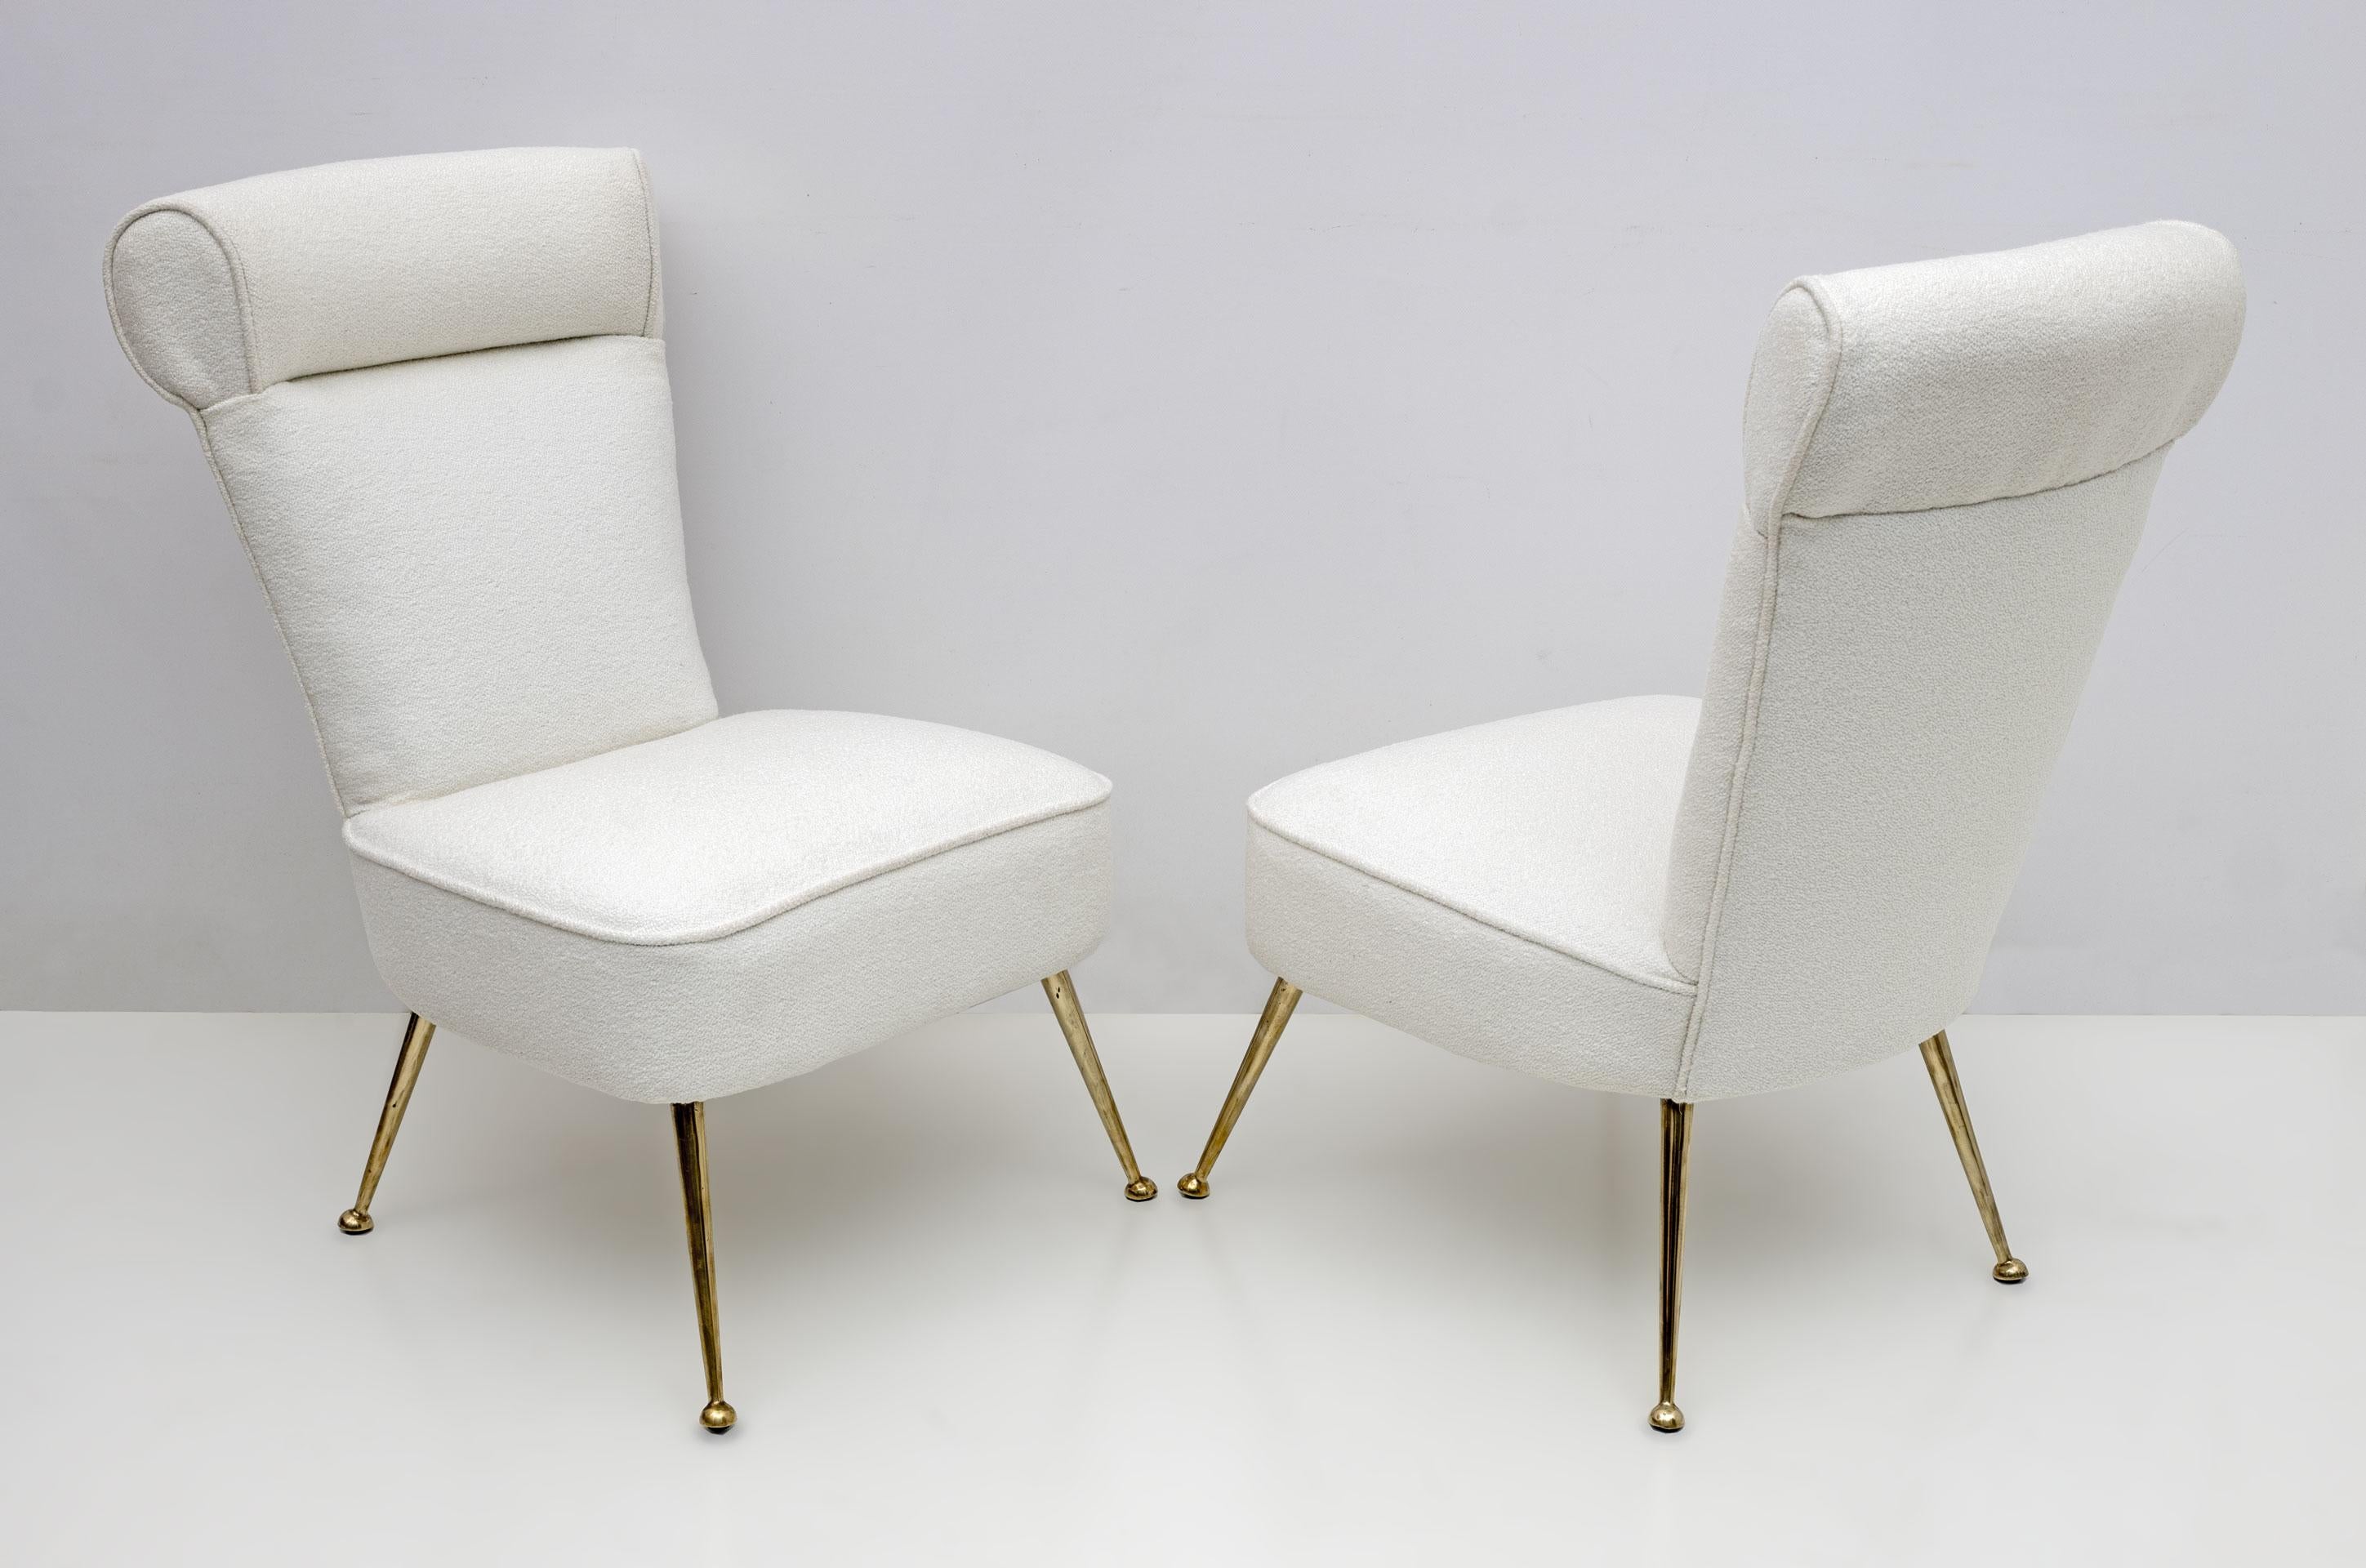 Pair of armchairs designed by Gigi Radice for Minotti Italia, Italian production from the 1950s, completely restored and upholstered in Boucle fabric, brass legs. They fit very well in the bedroom or living room.
The price is for the pair